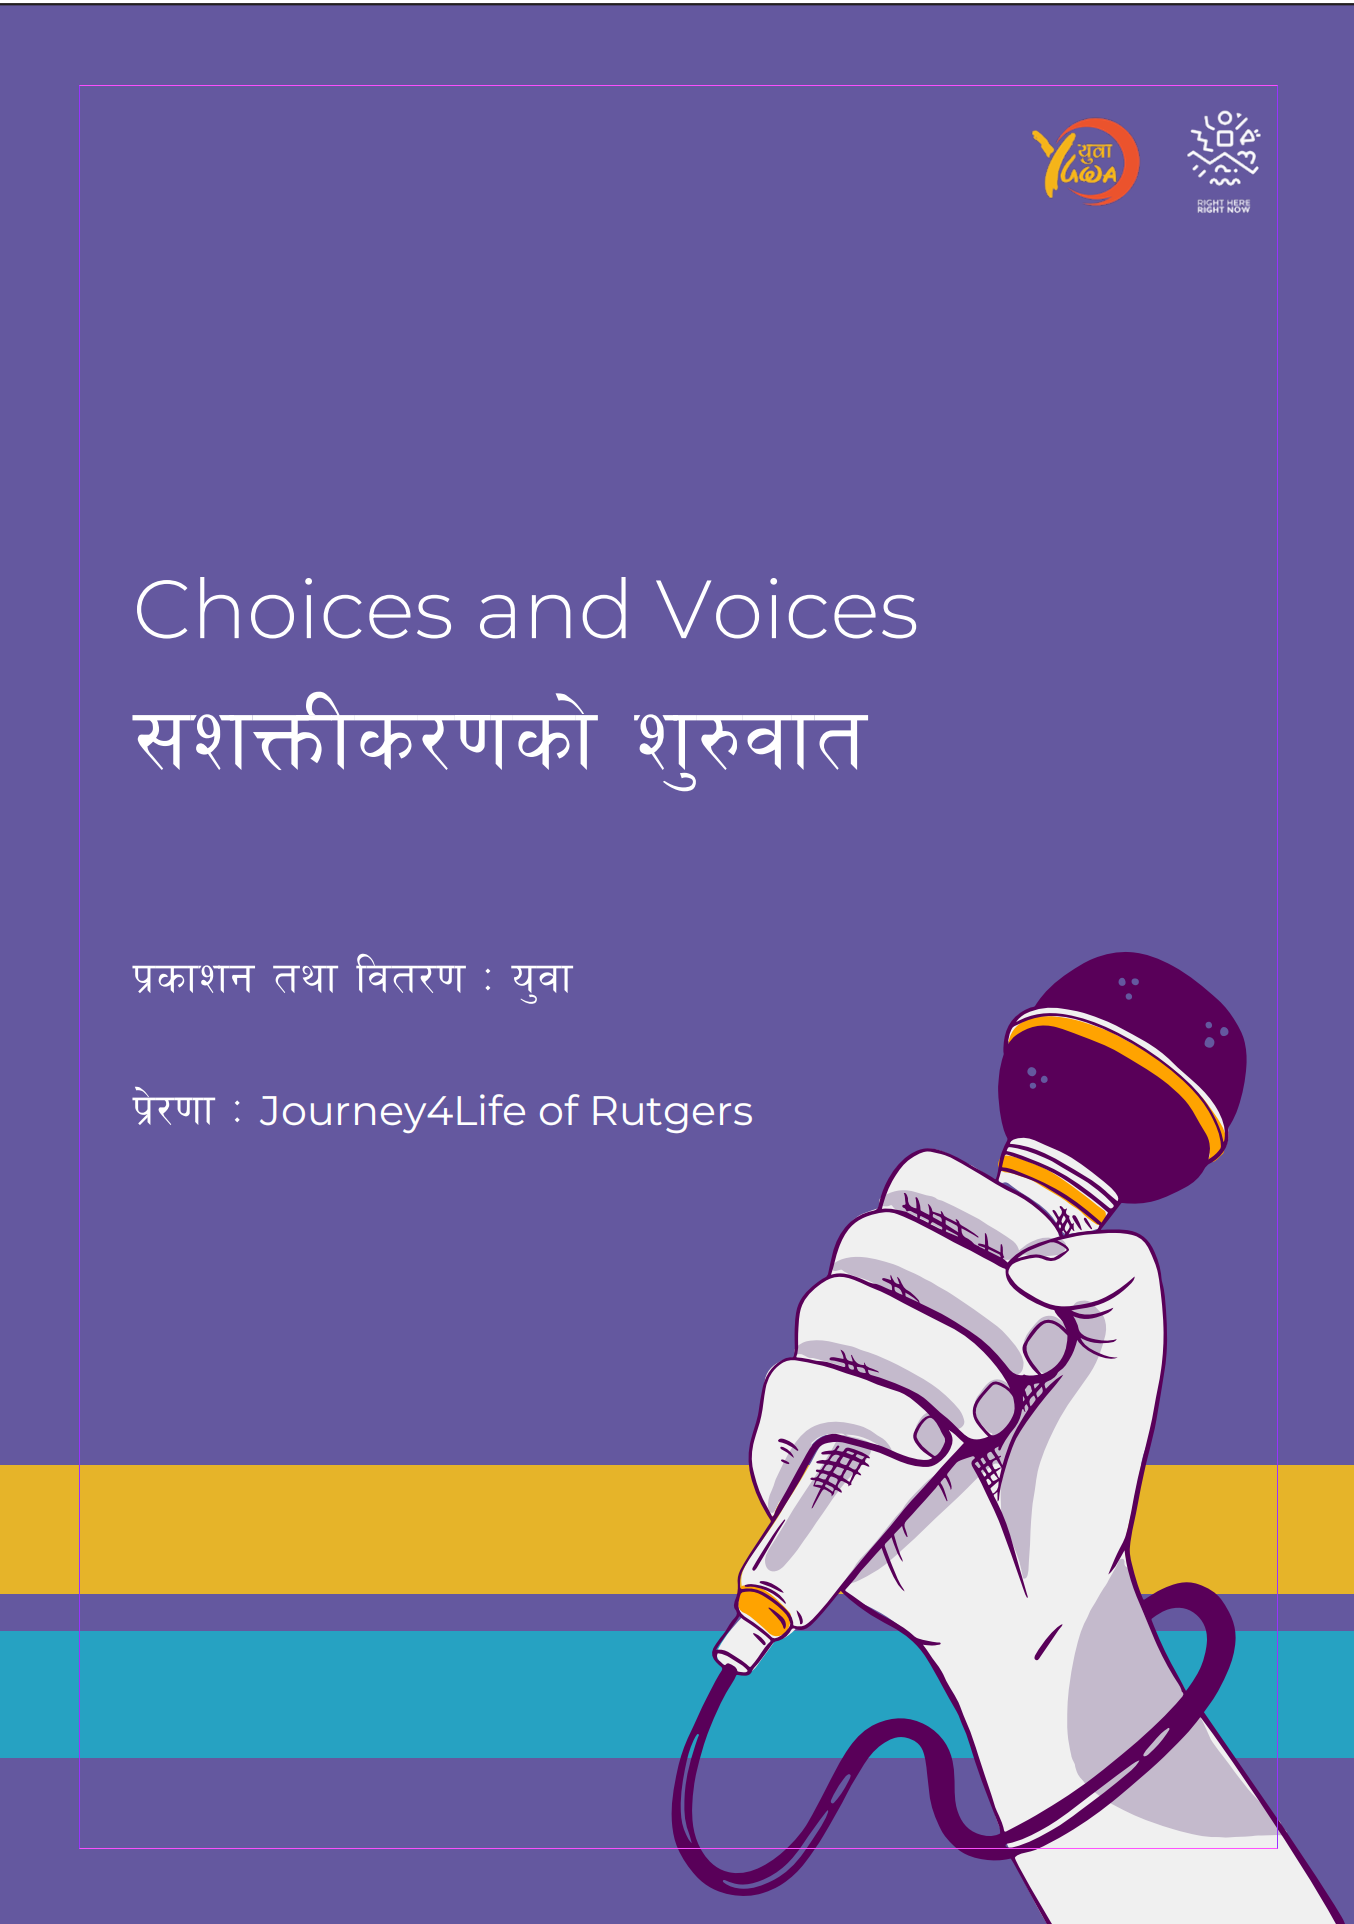 Choices and Voices Nepali Version